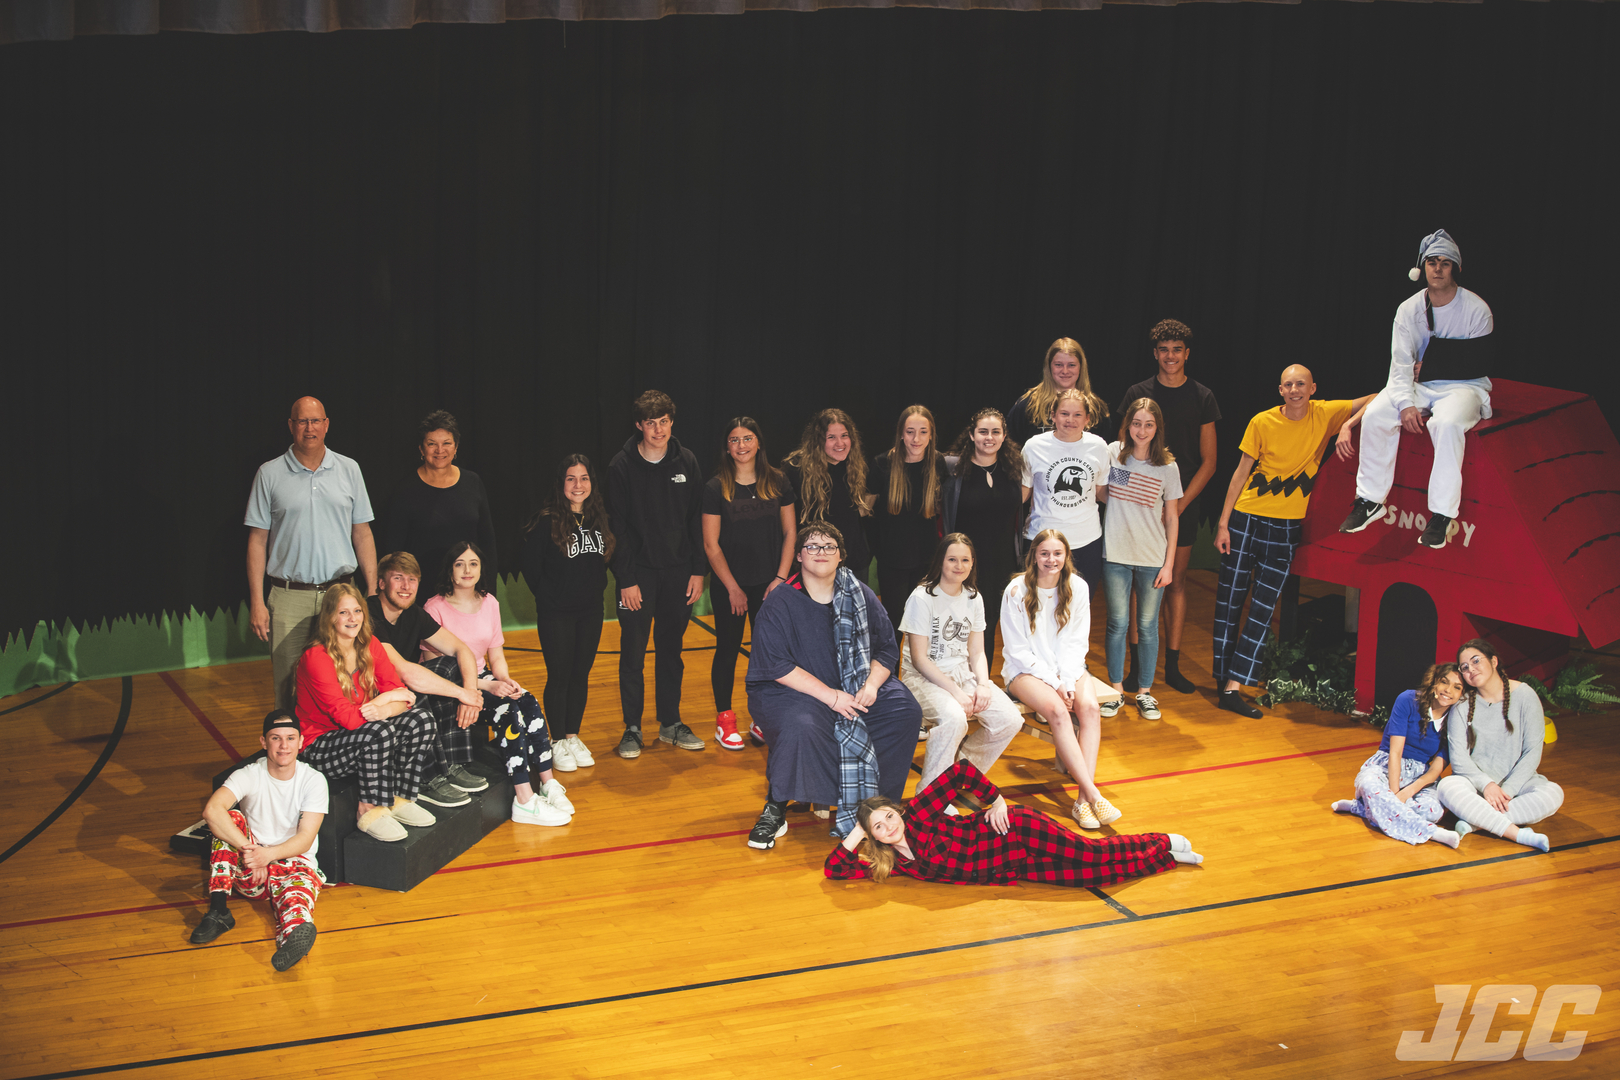 JCC Cast & Crew pictured on stage